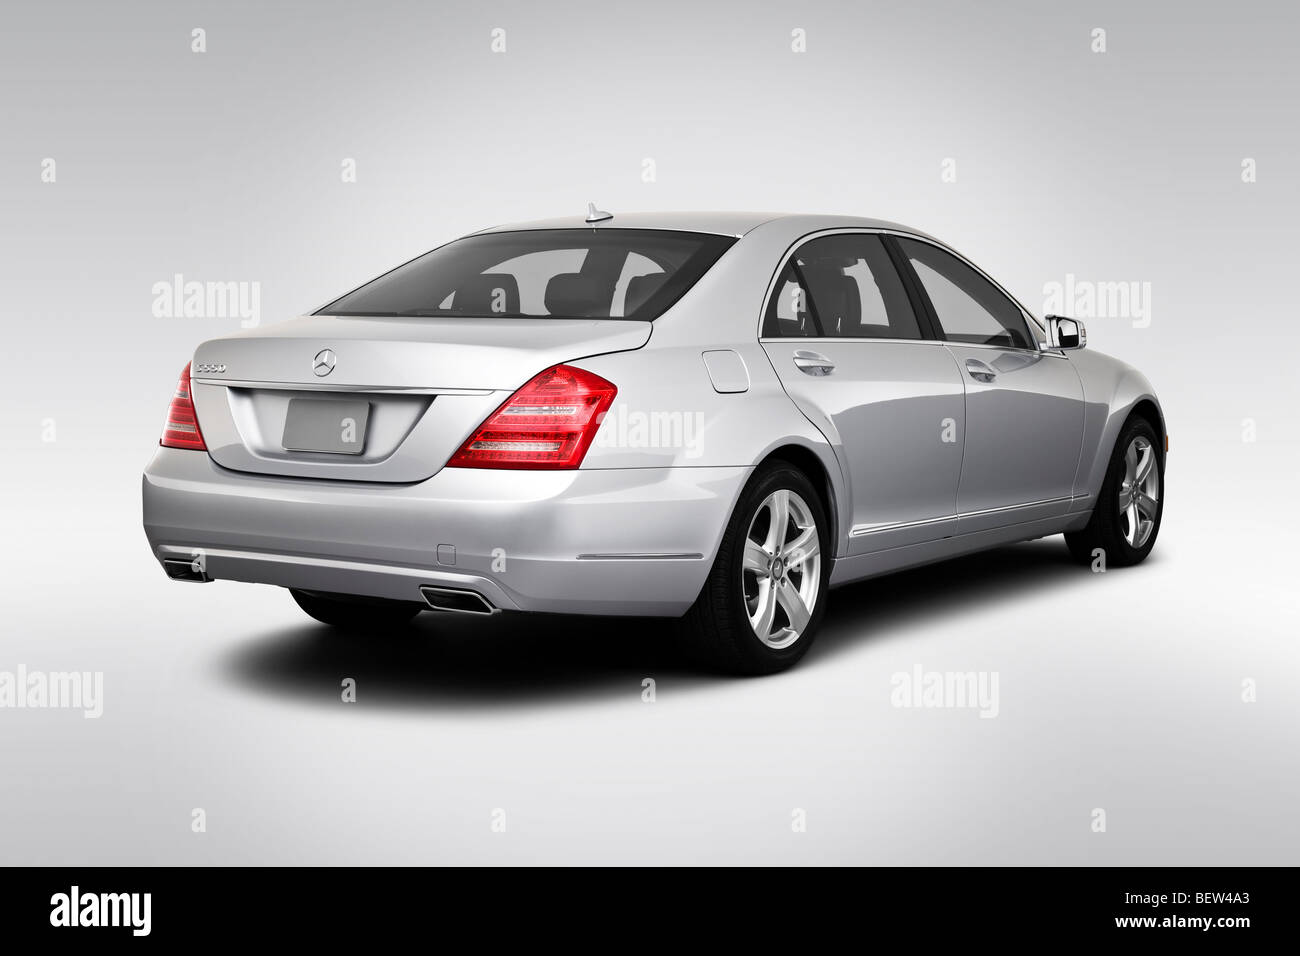 2010 Mercedes-Benz S-Class S550 in Silver - Rear angle view Stock Photo